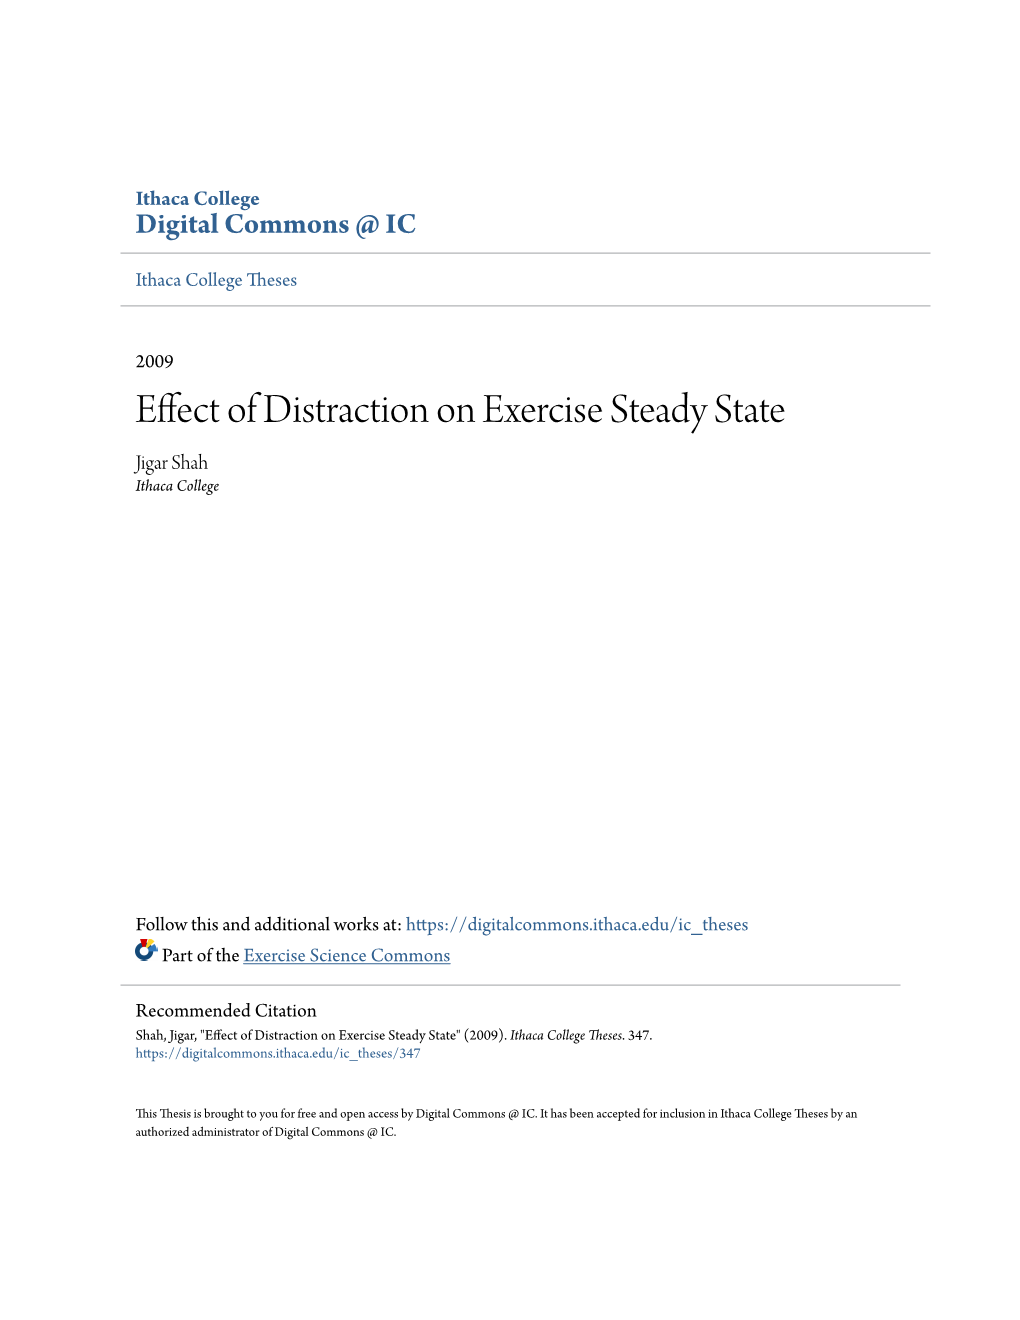 Effect of Distraction on Exercise Steady State Jigar Shah Ithaca College